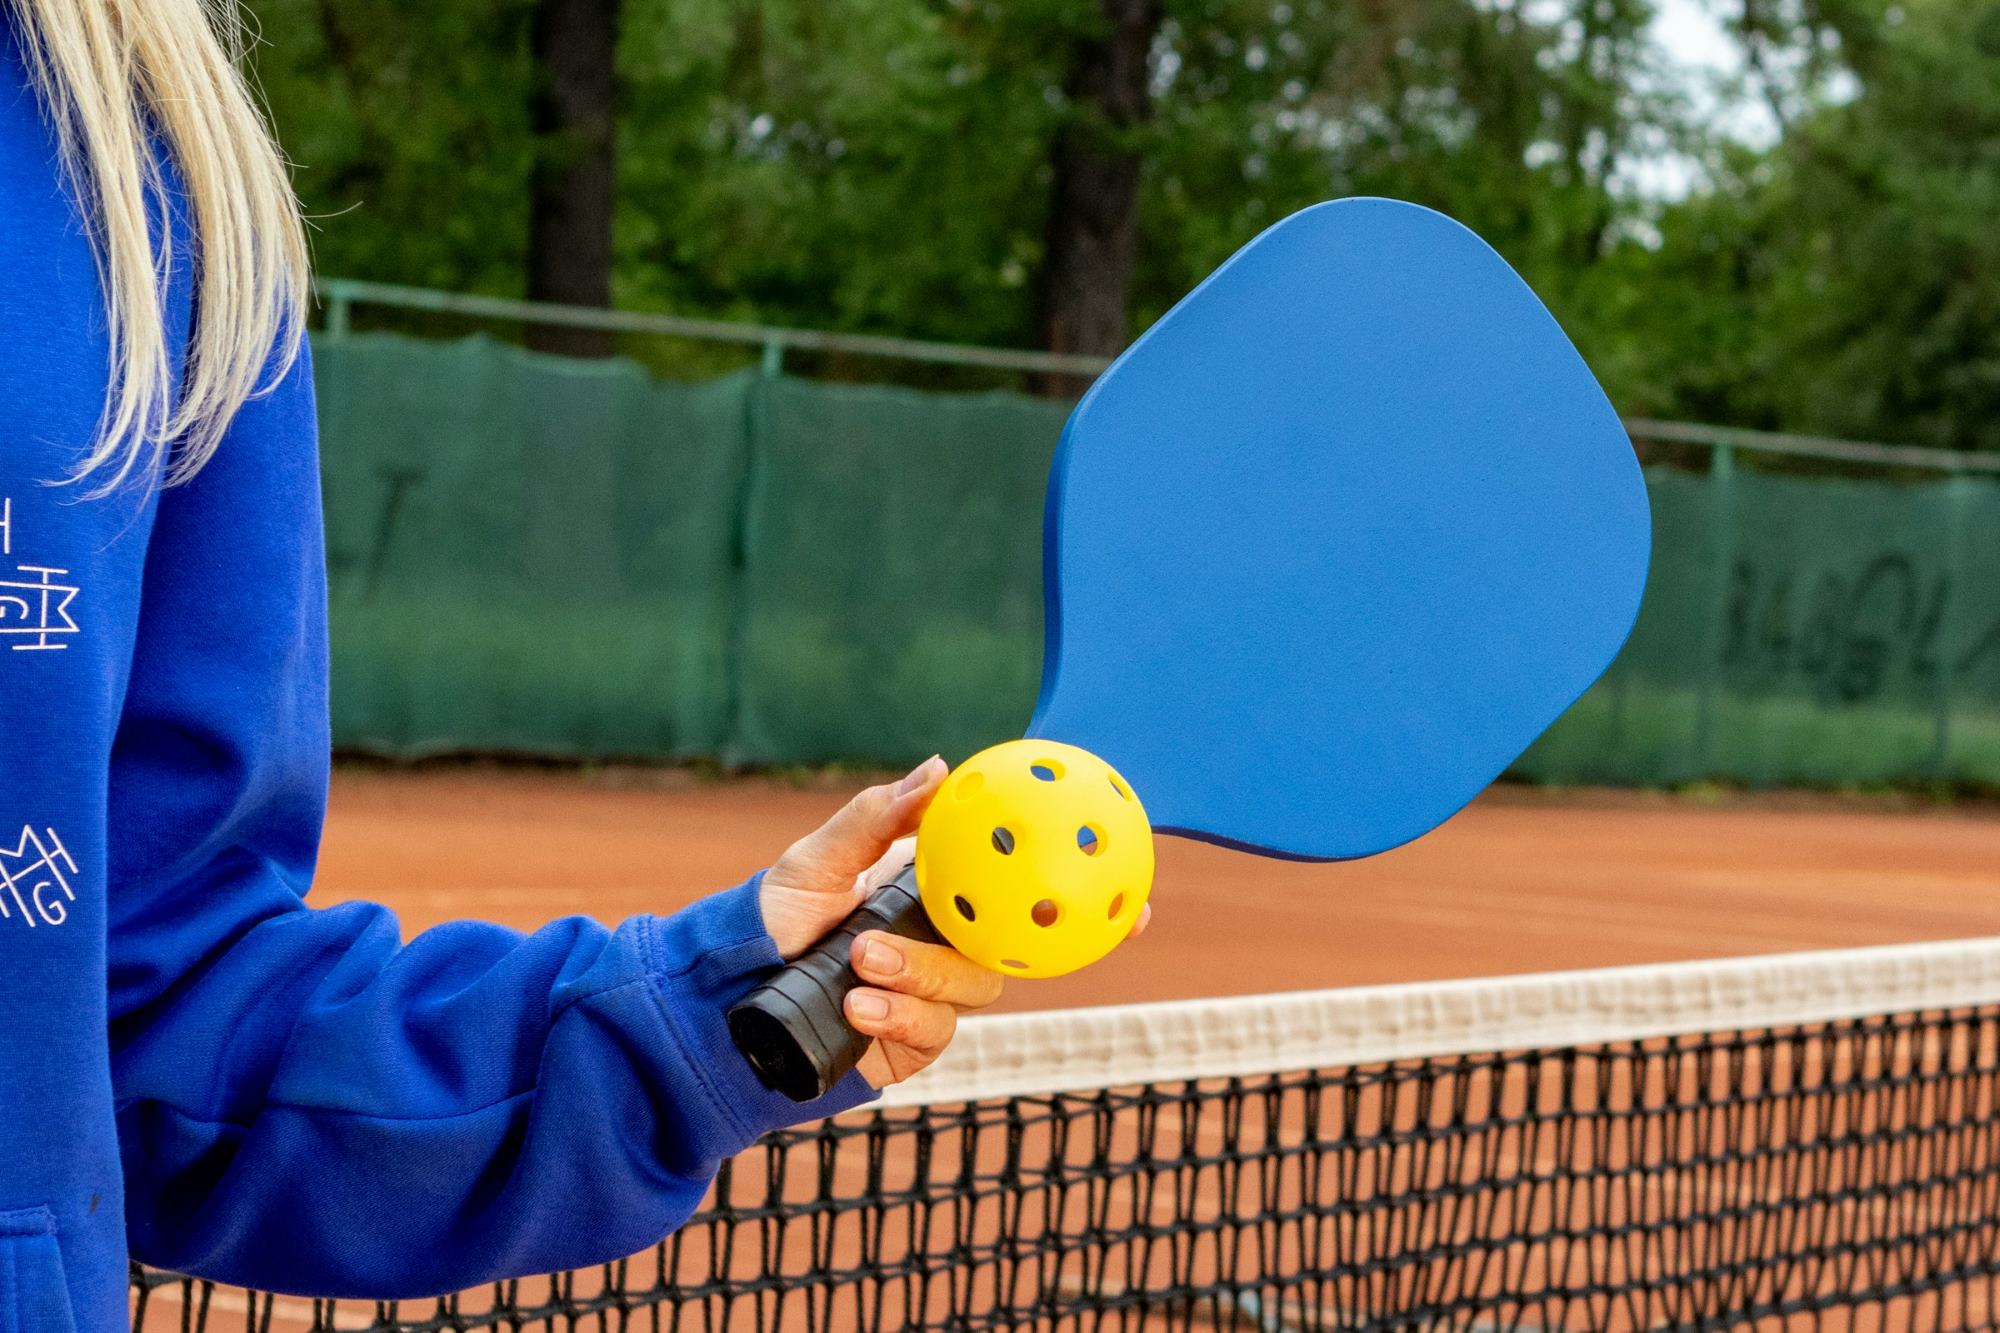 Pickleball player with racket and ball image.